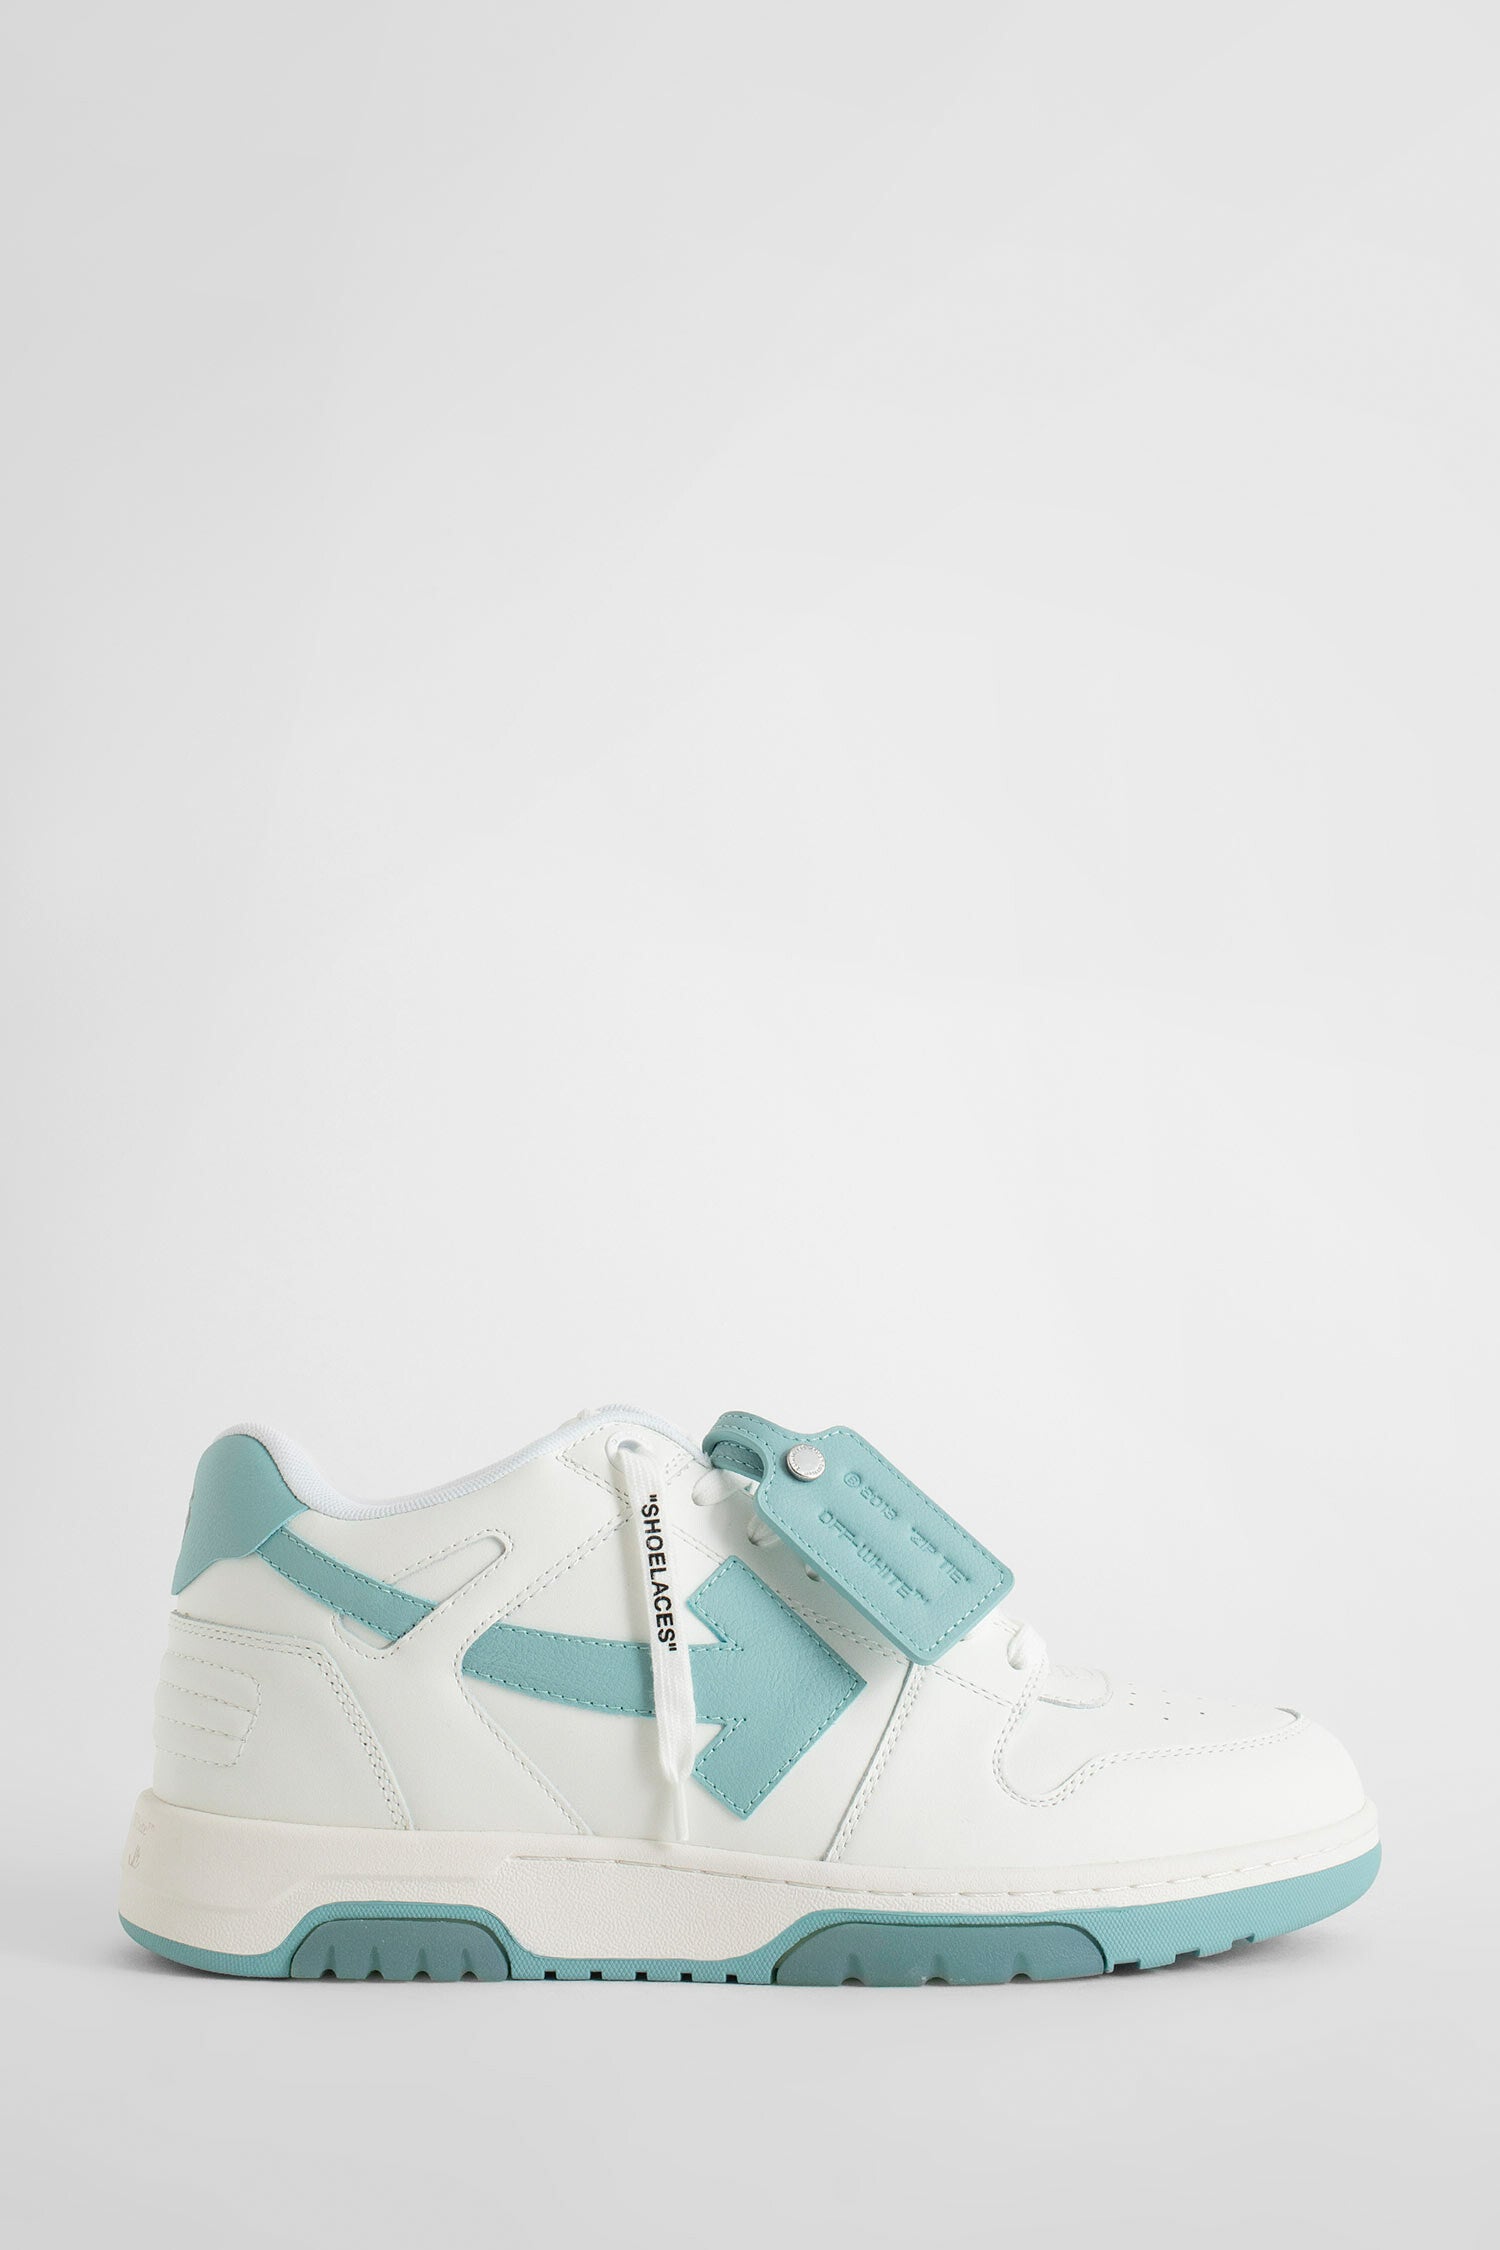 OFF-WHITE SNEAKERS - OFF-WHITE - SNEAKERS |